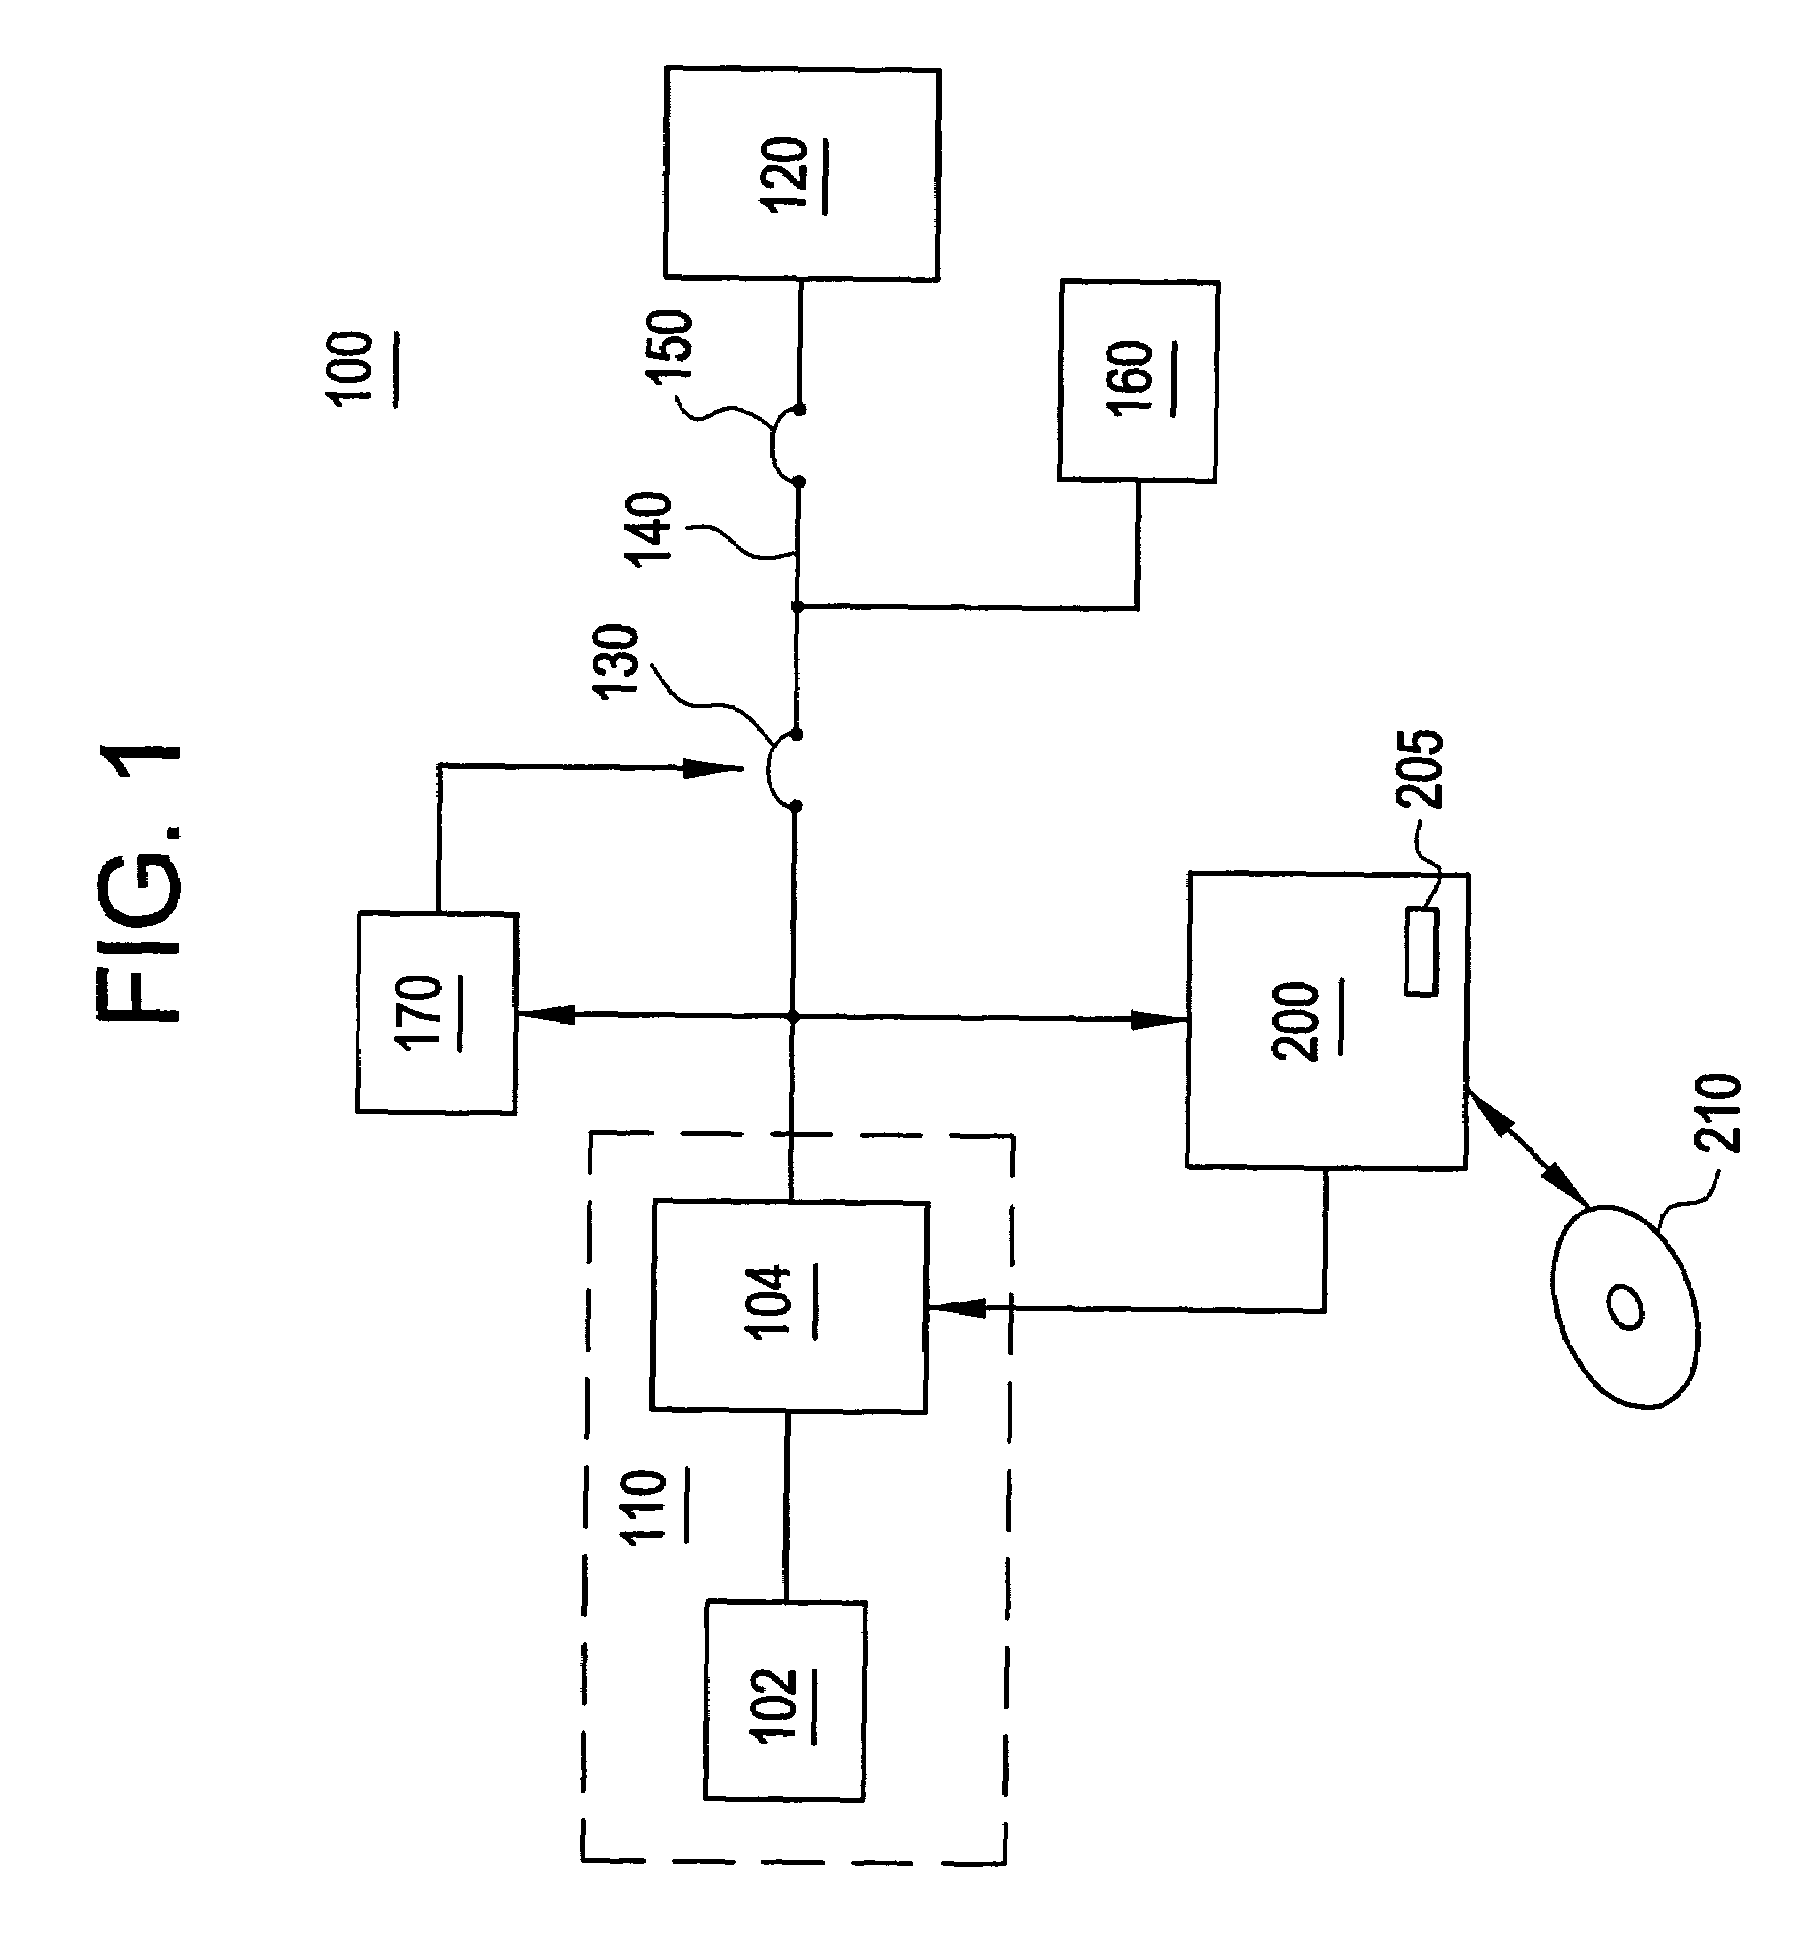 Method and apparatus for anti-islanding protection of distributed generations